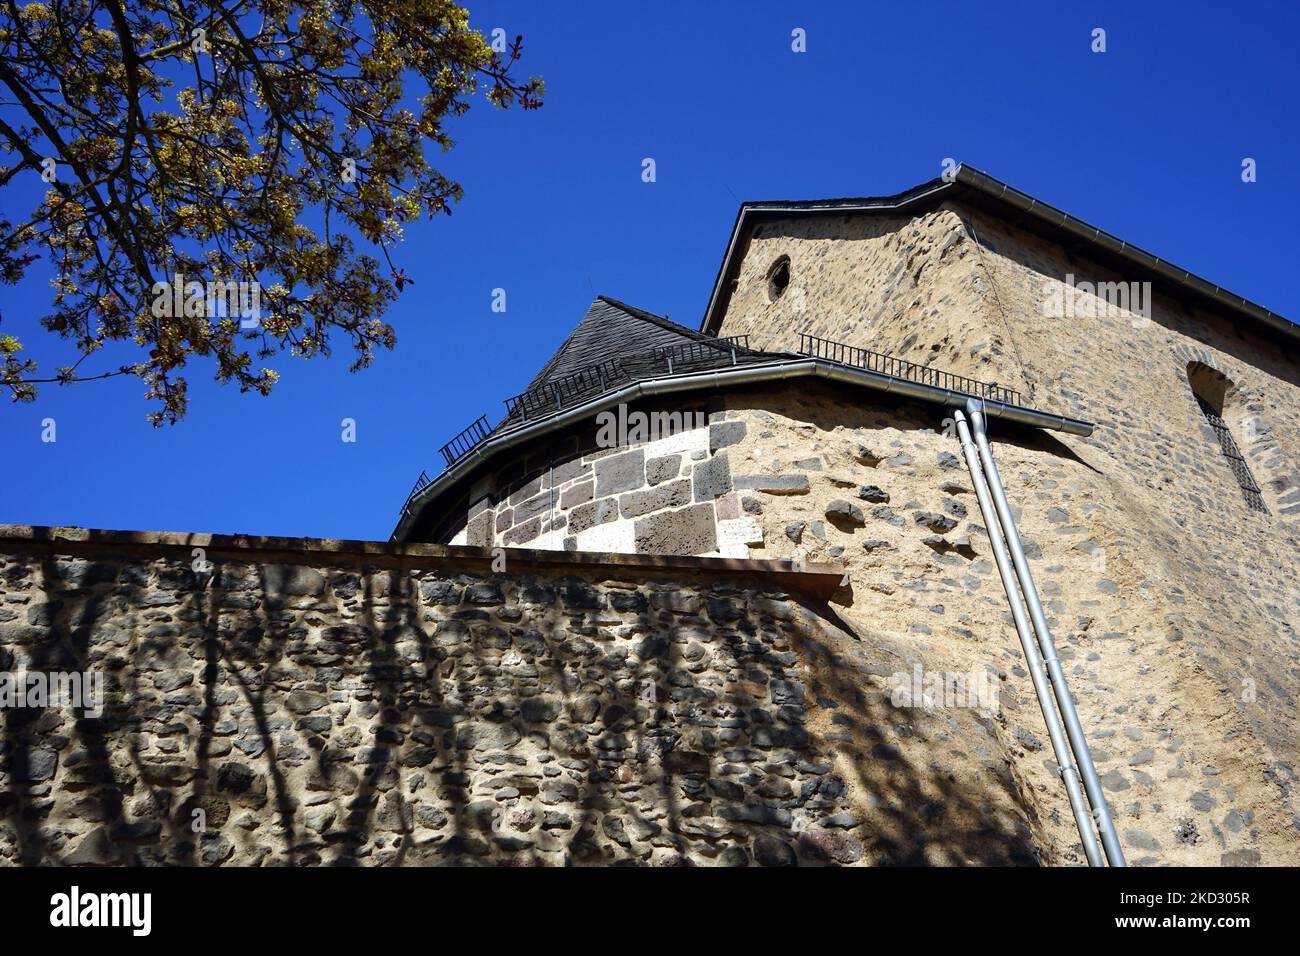 A scenic shot of a Fortress Falkenberg against the blue sky in Germany Stock Photo